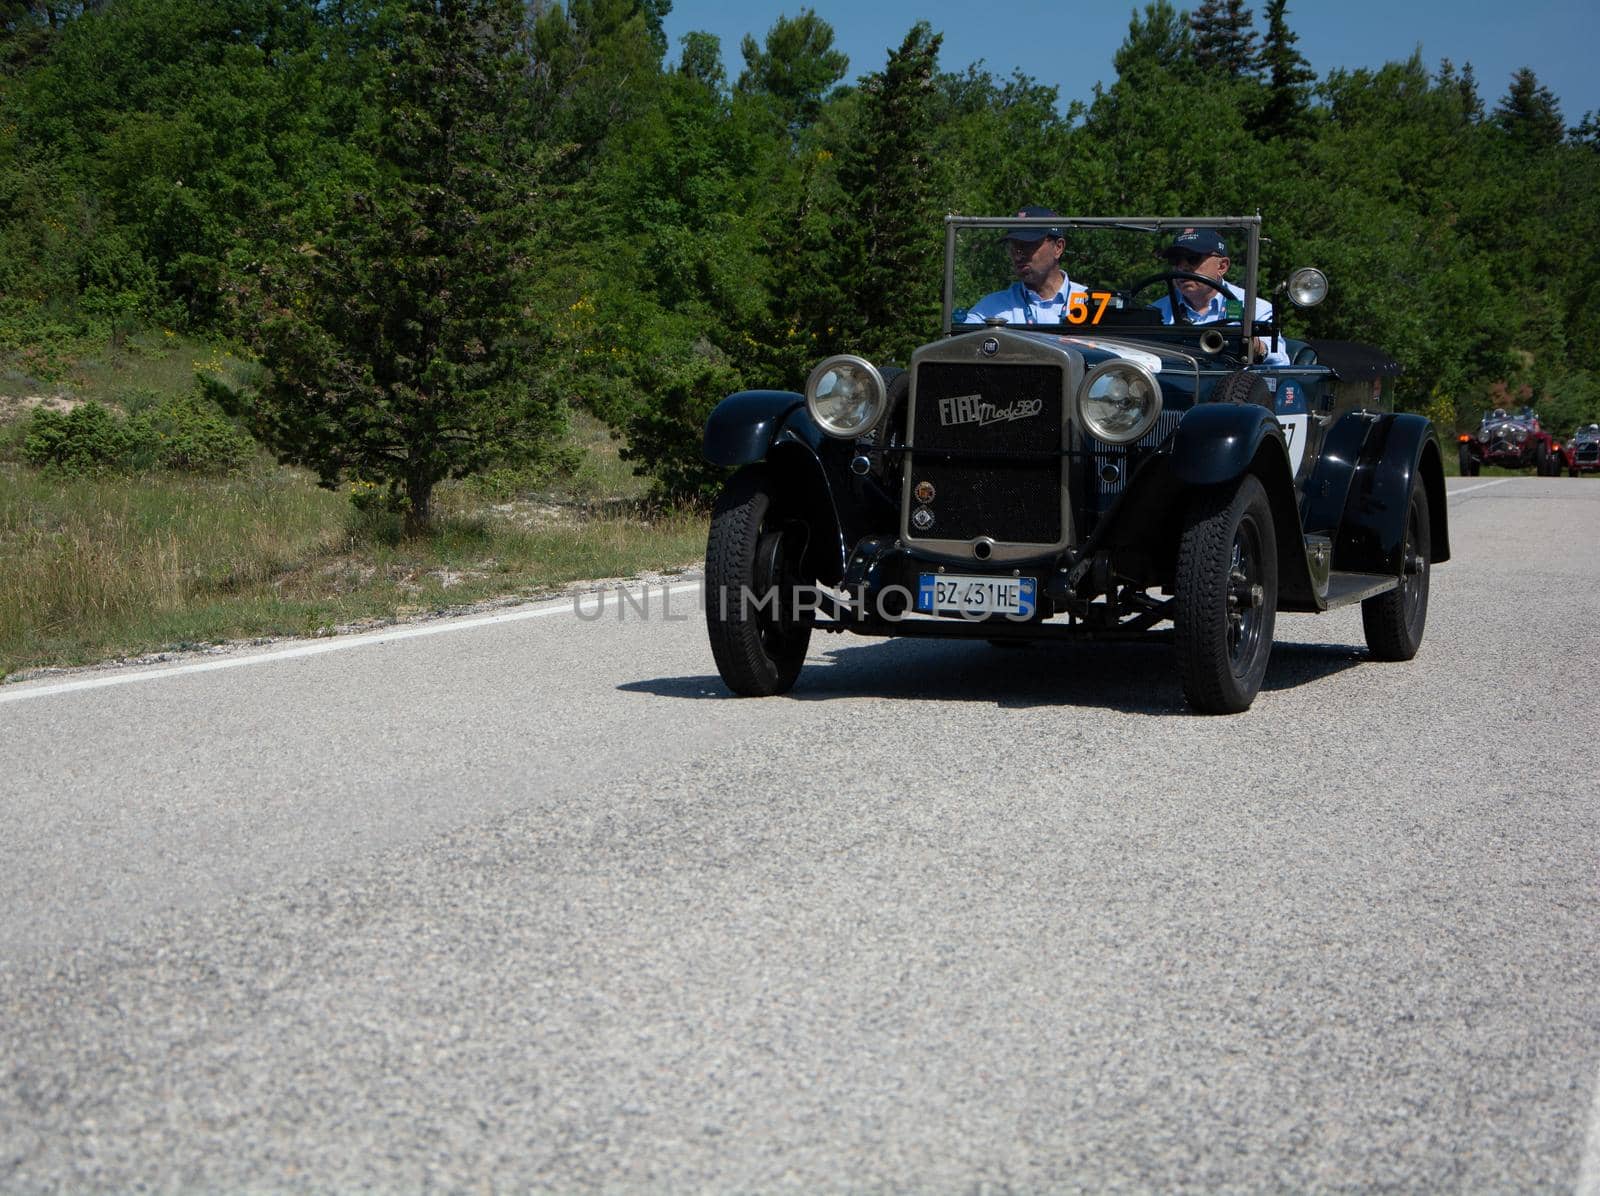 URBINO - ITALY - JUN 16 - 2022 : FIAT 520 1929 on an old racing car in rally Mille Miglia 2022 the famous italian historical race (1927-1957